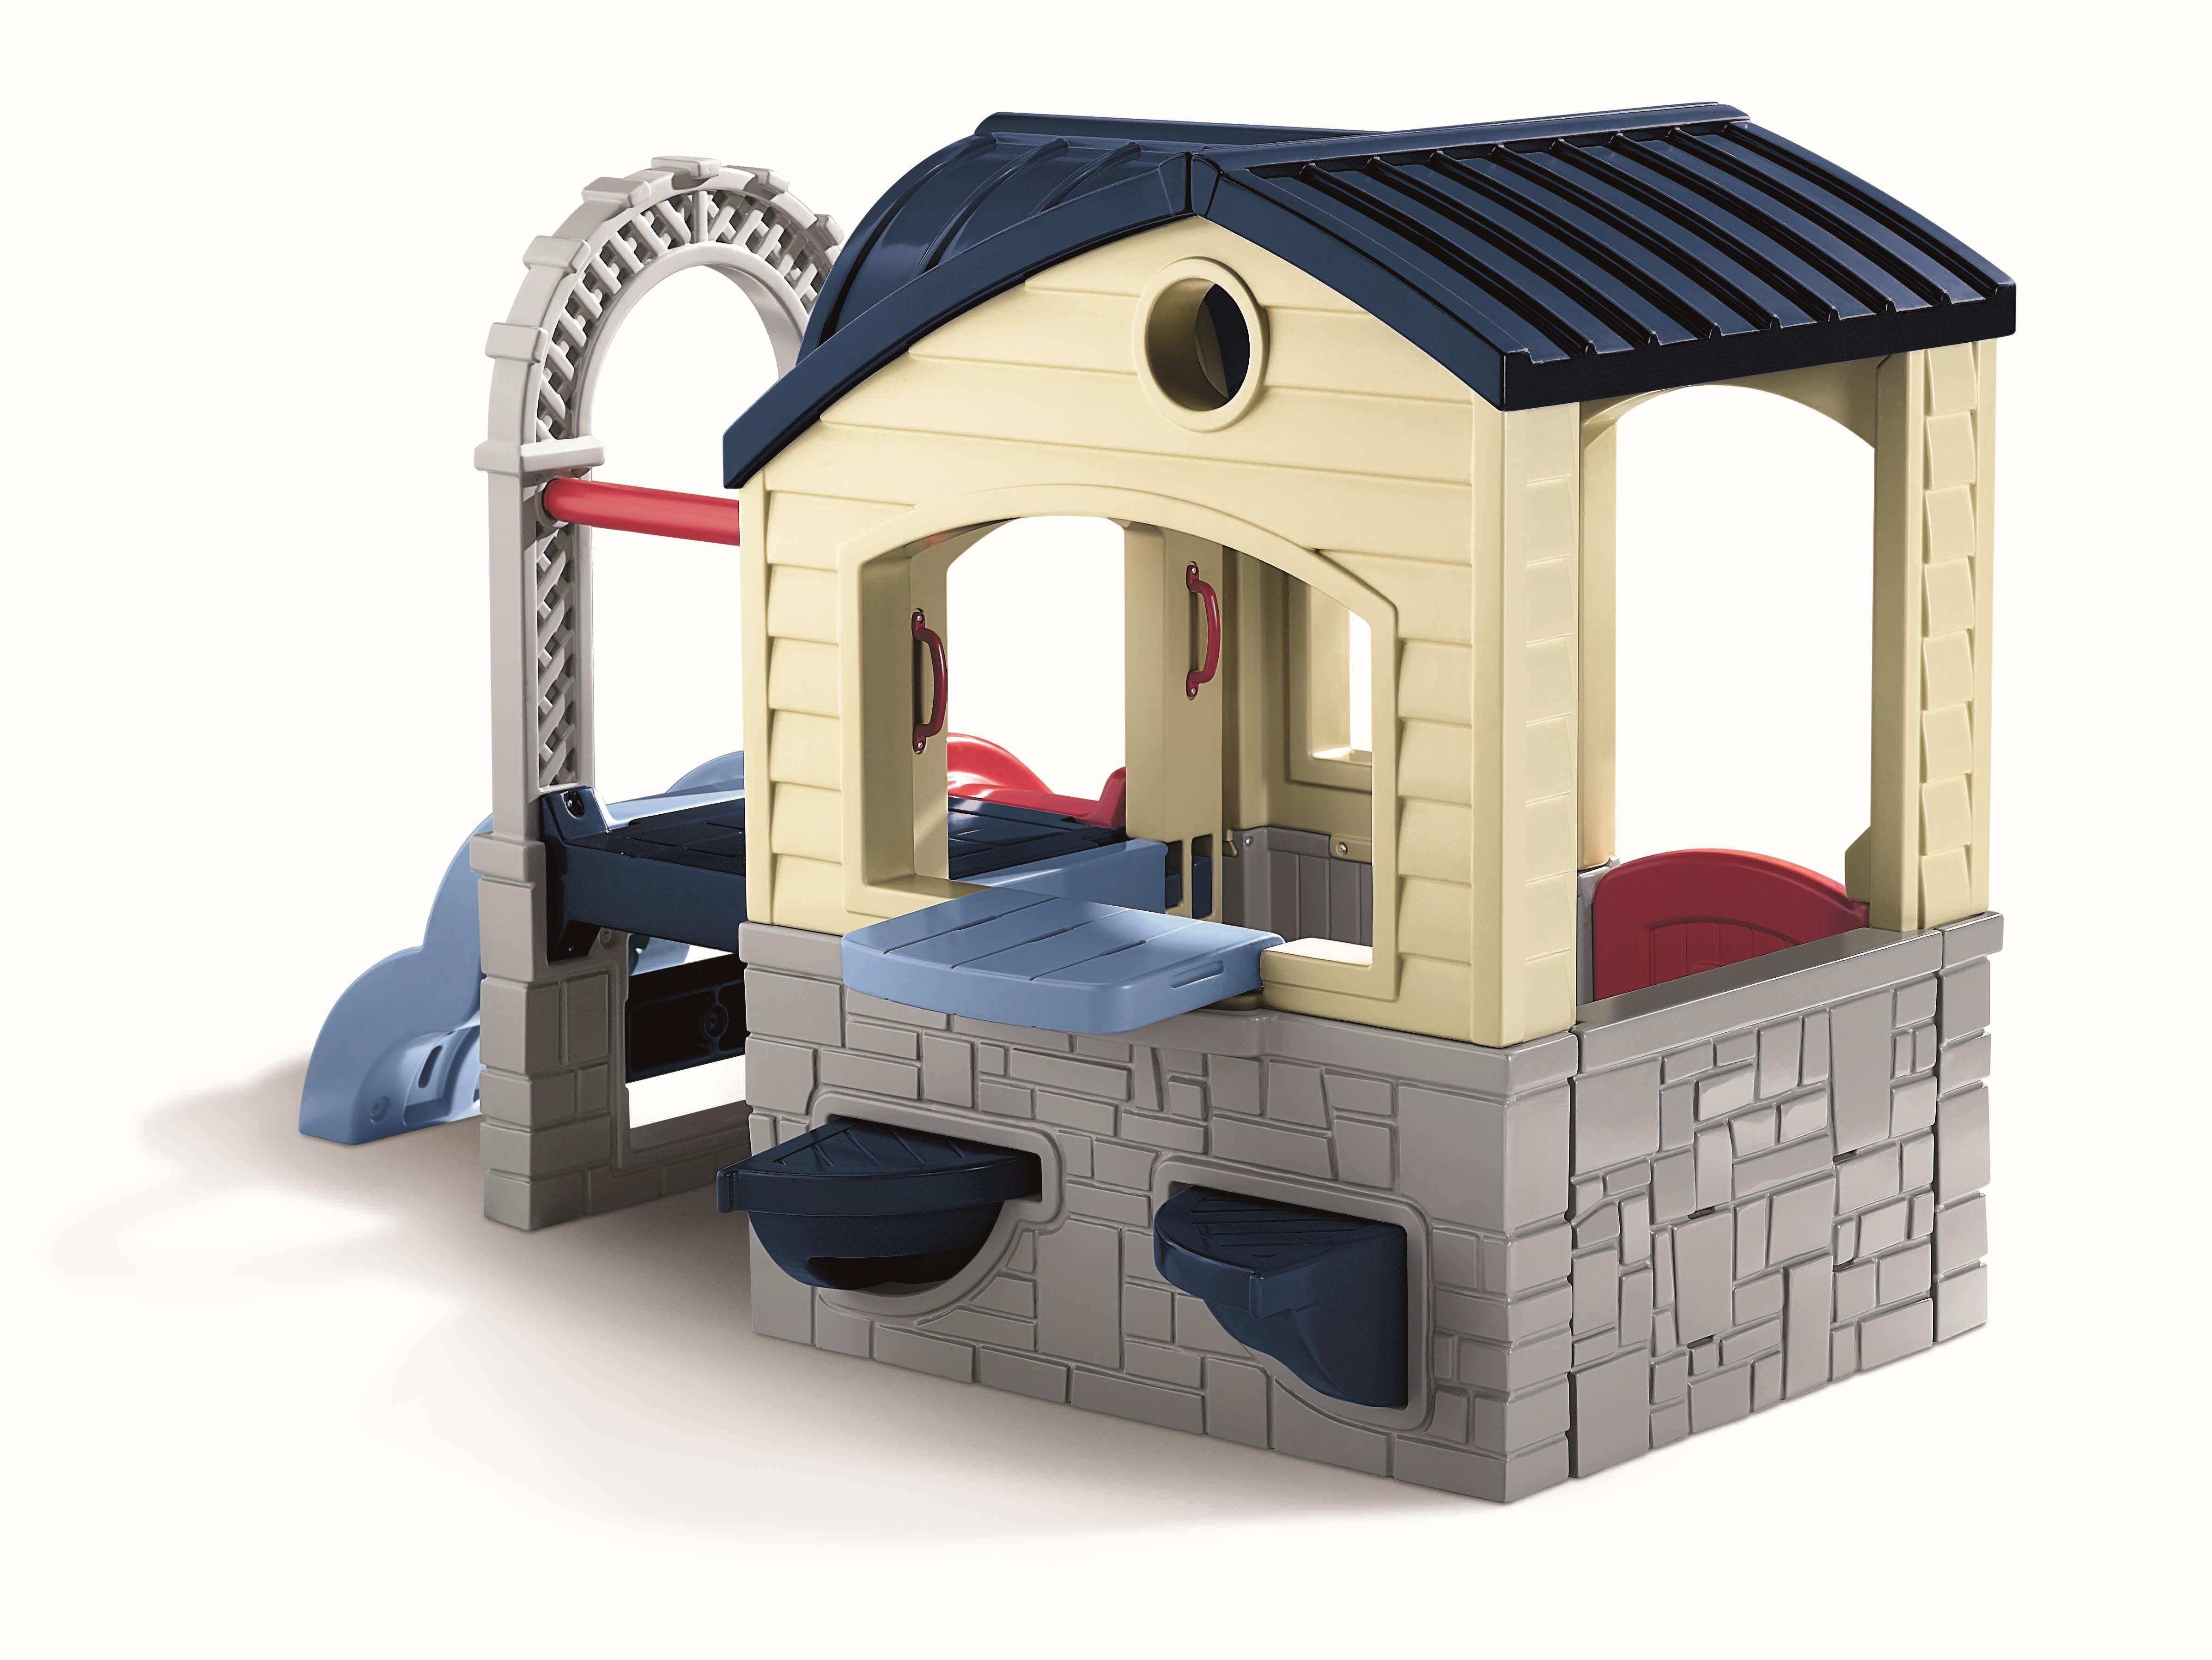 Best ideas about Little Tikes Picnic On The Patio Playhouse
. Save or Pin Little Tikes Picnic n Playhouse by OJ merce Now.